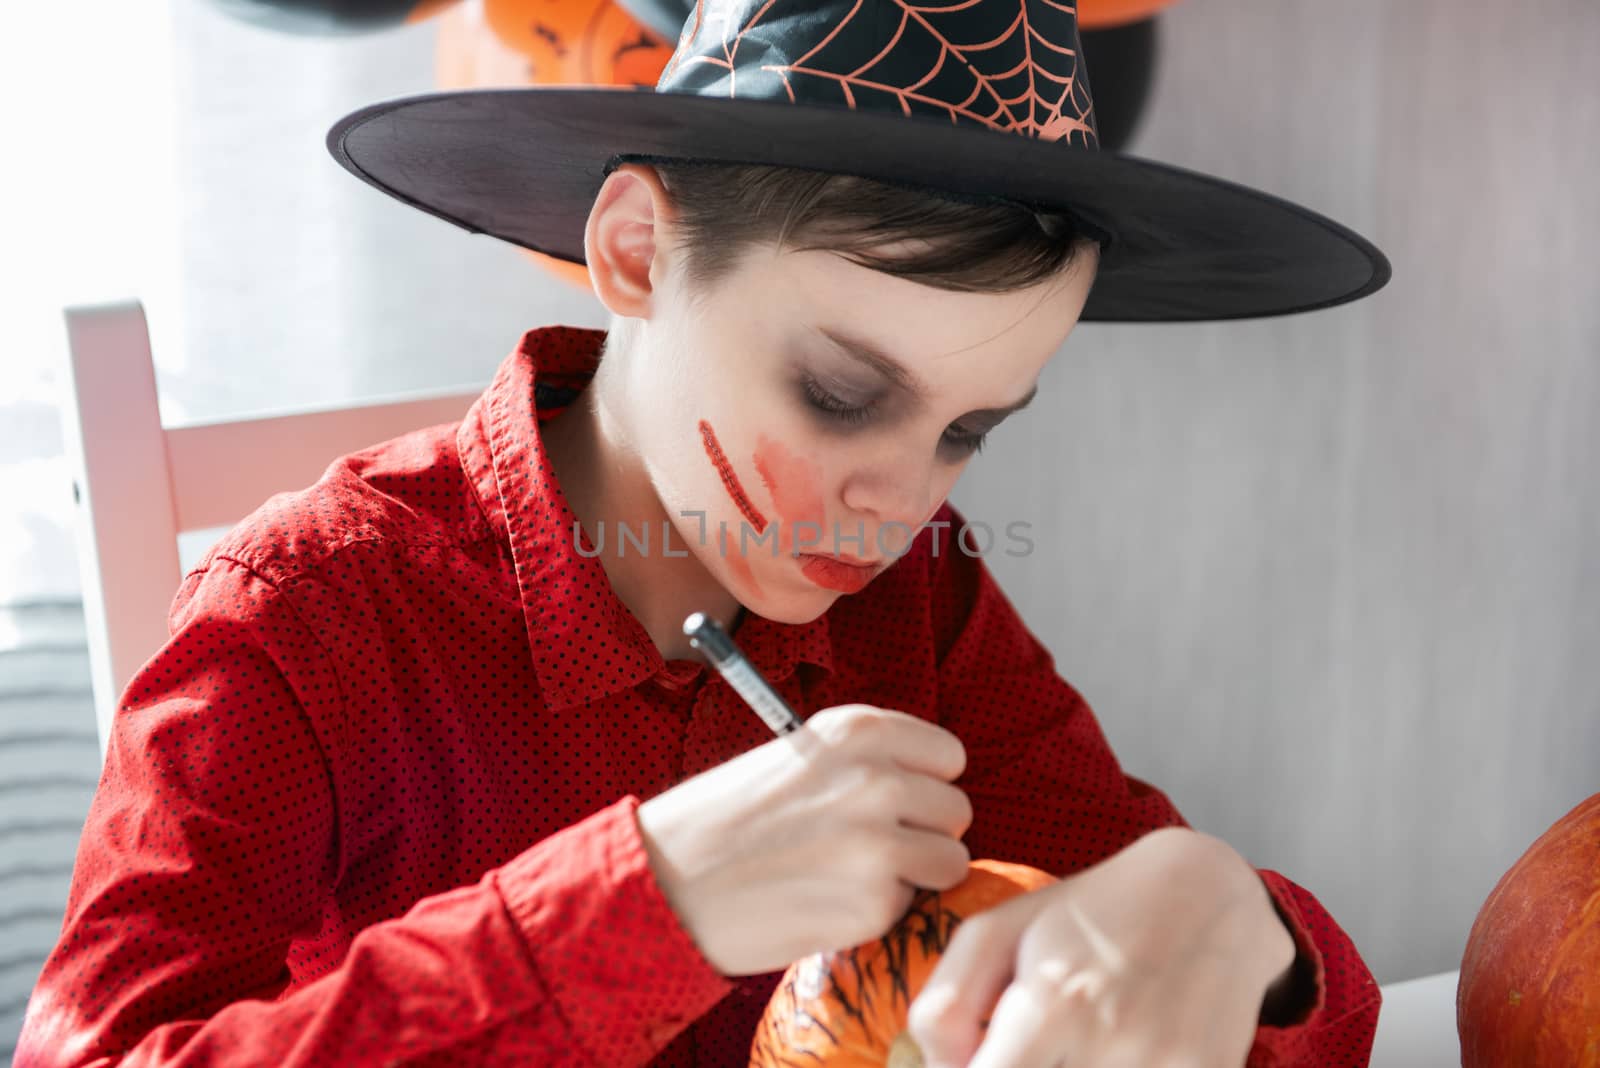 Teen boy in costume preparing for the Halloween celebration drawing a pumpkin. Halloween carnival or masquerade concept